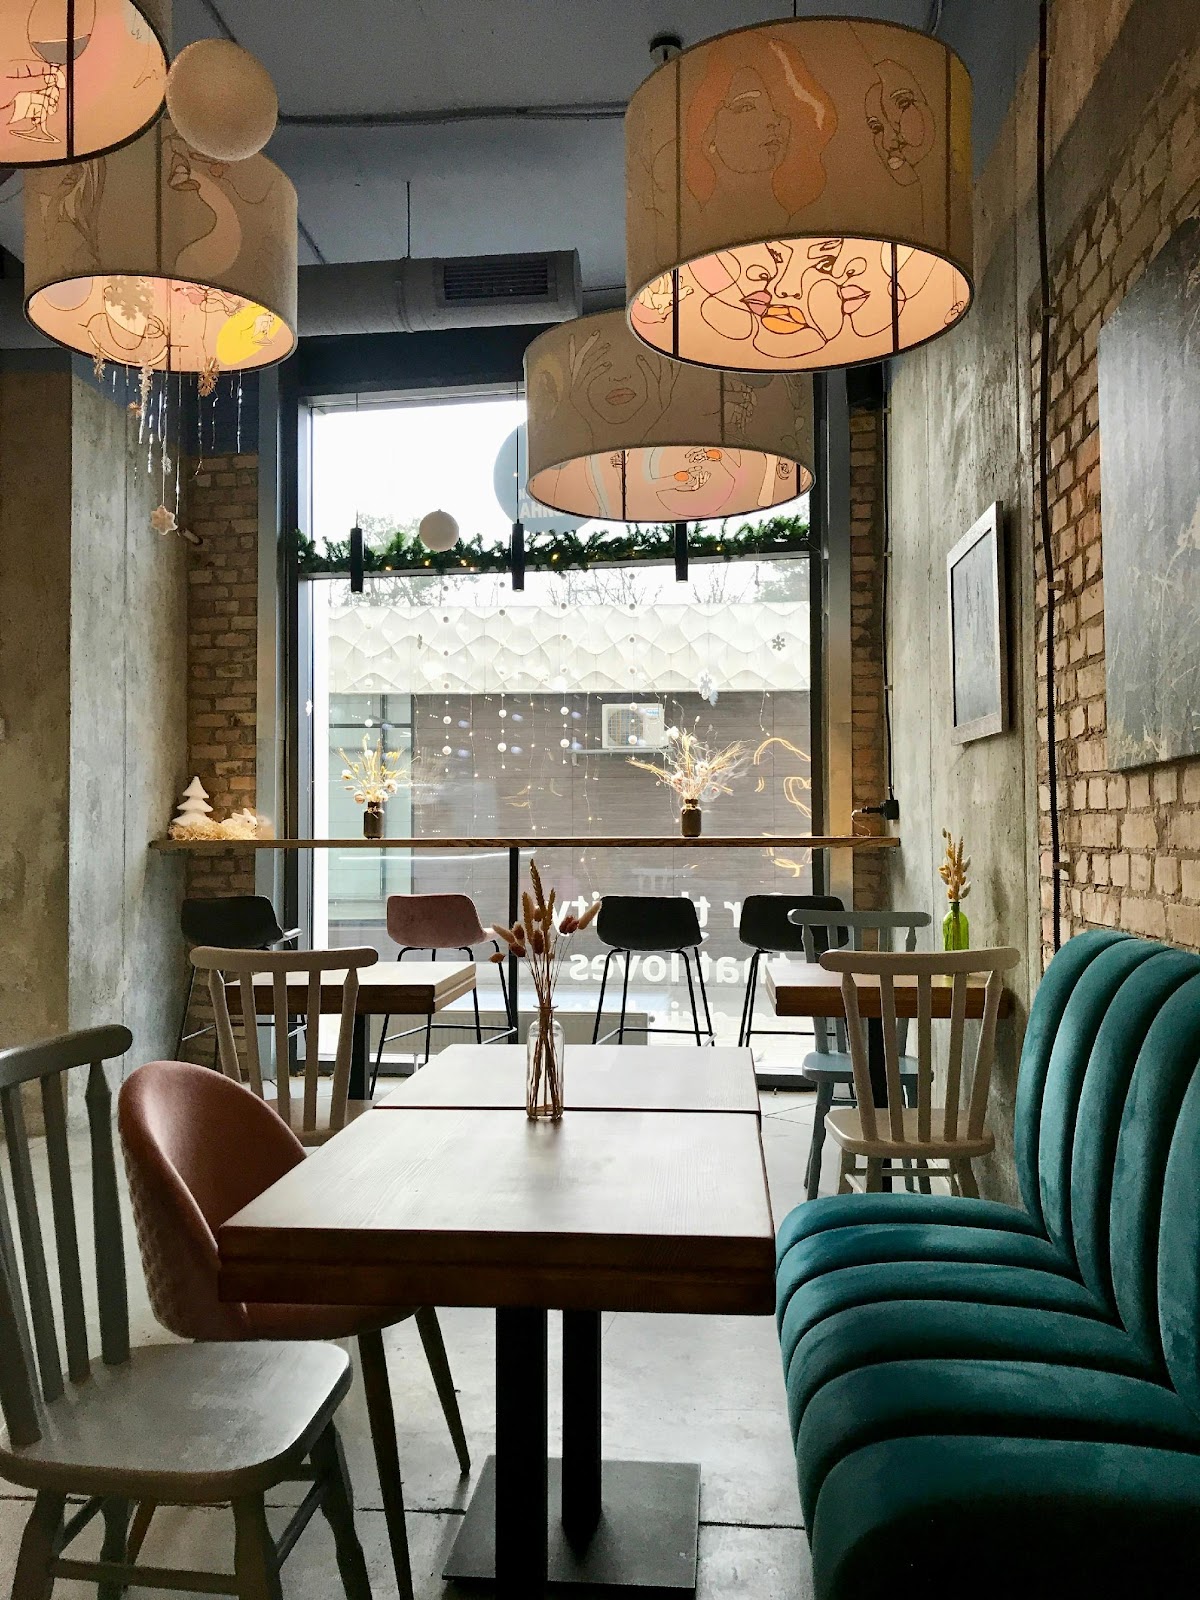 Designing Delight: The Impact of Interior Design on Cafe Atmosphere and Customer Engagement